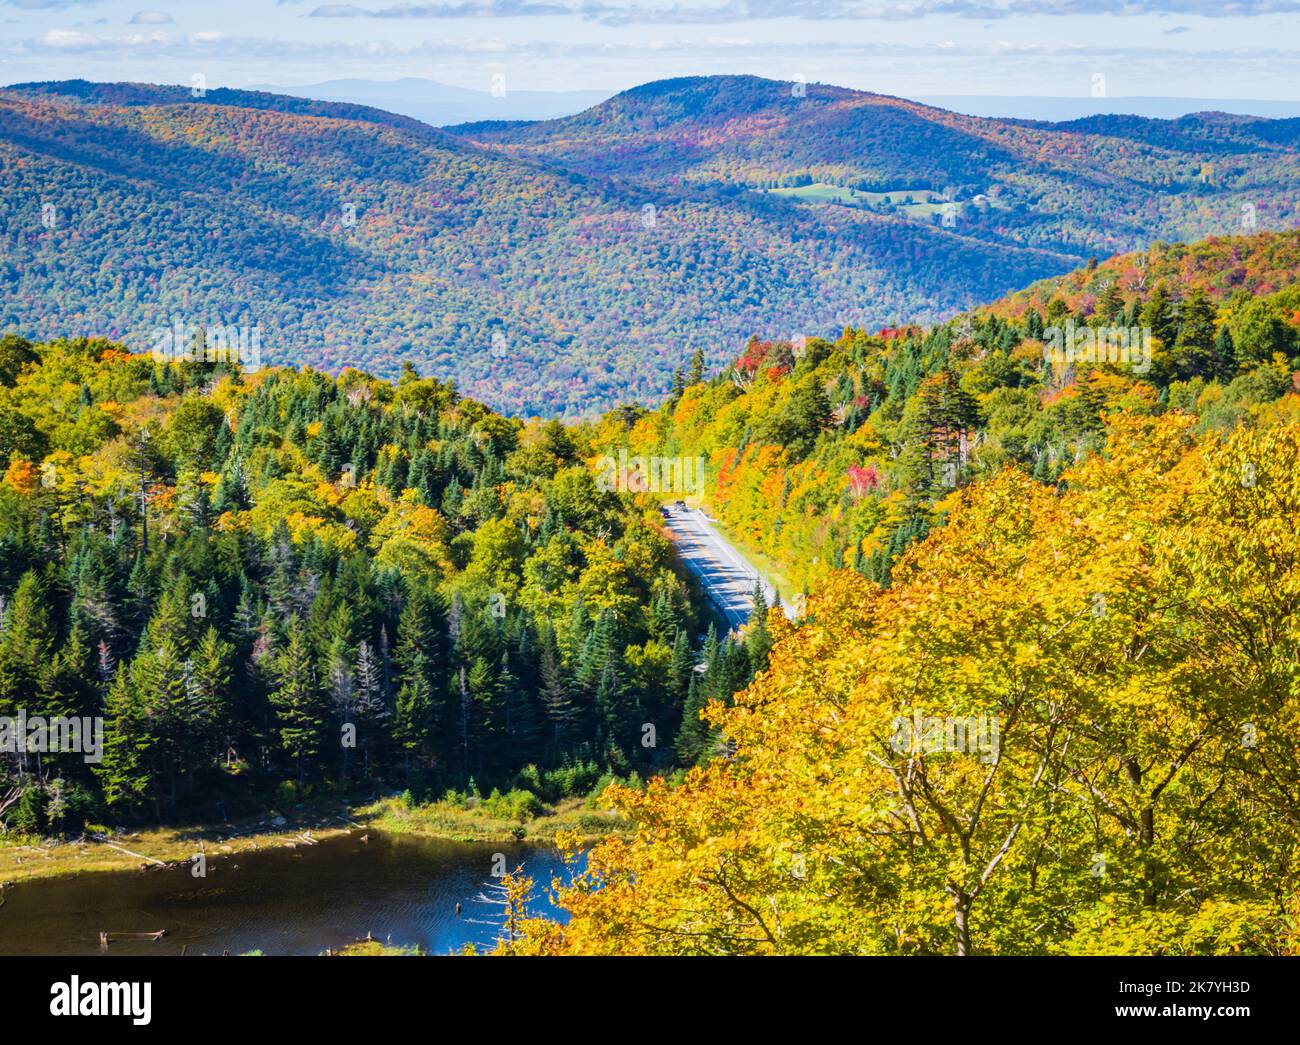 road winds through the Appalachian Gap, a mountain pass in the Green Mountains of Vermont, in bright colored fall foliage Stock Photo